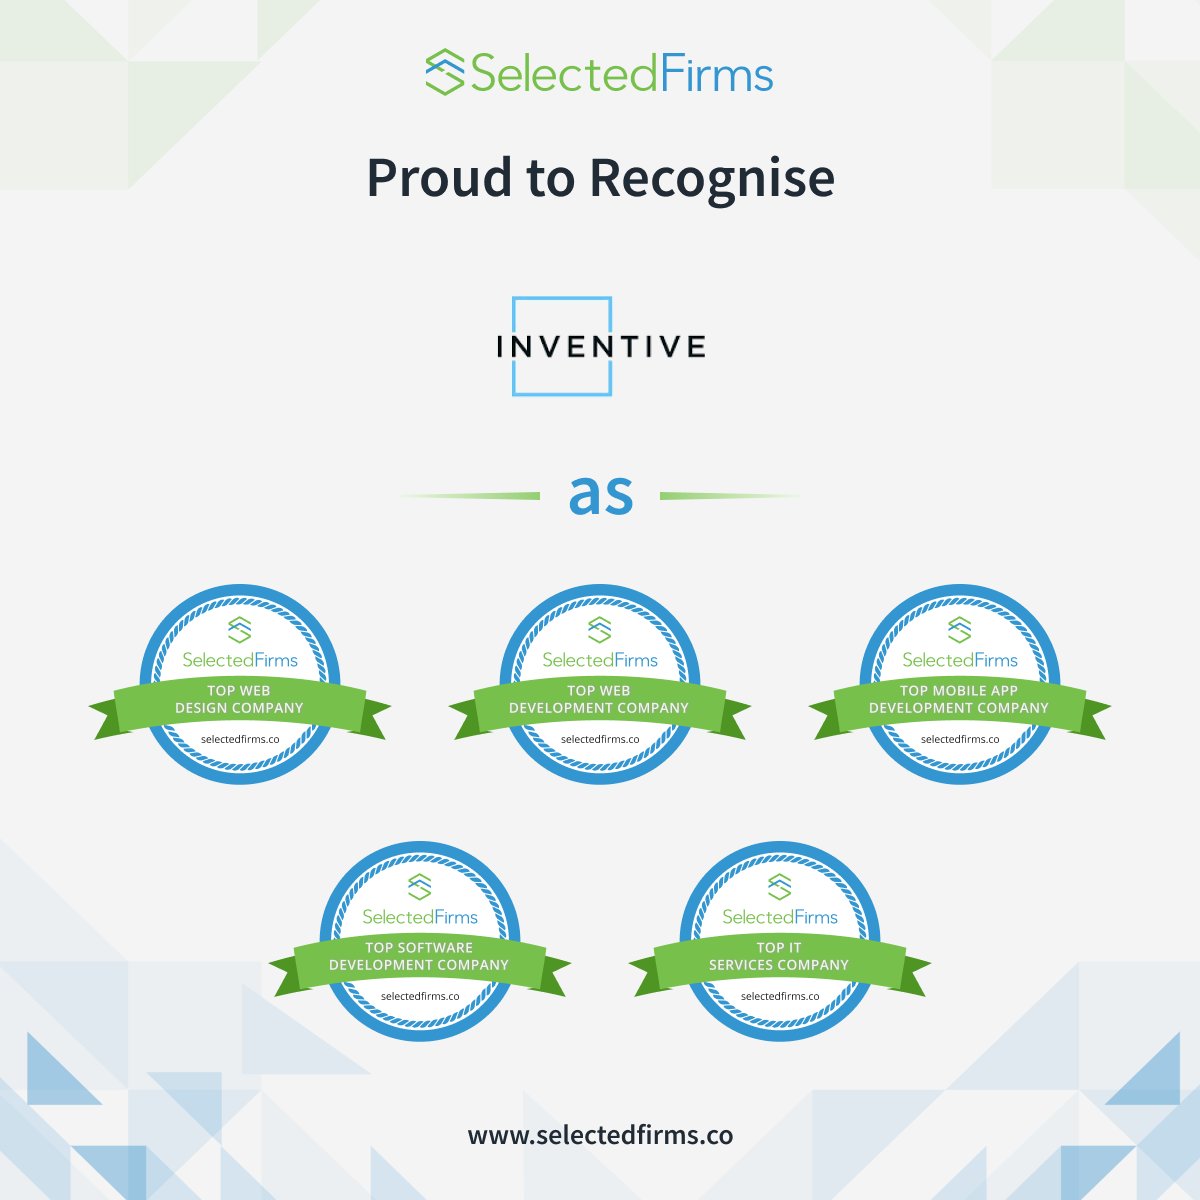 SelectedFirms is happy to recognise @InventiveGroup  as:

Top web design company in the USA
Top web development company in the USA
Top Mobile App Development Company
Top Software Development Company
Top It Services Company

Check out their portfolio on: bit.ly/3QtQ6H4